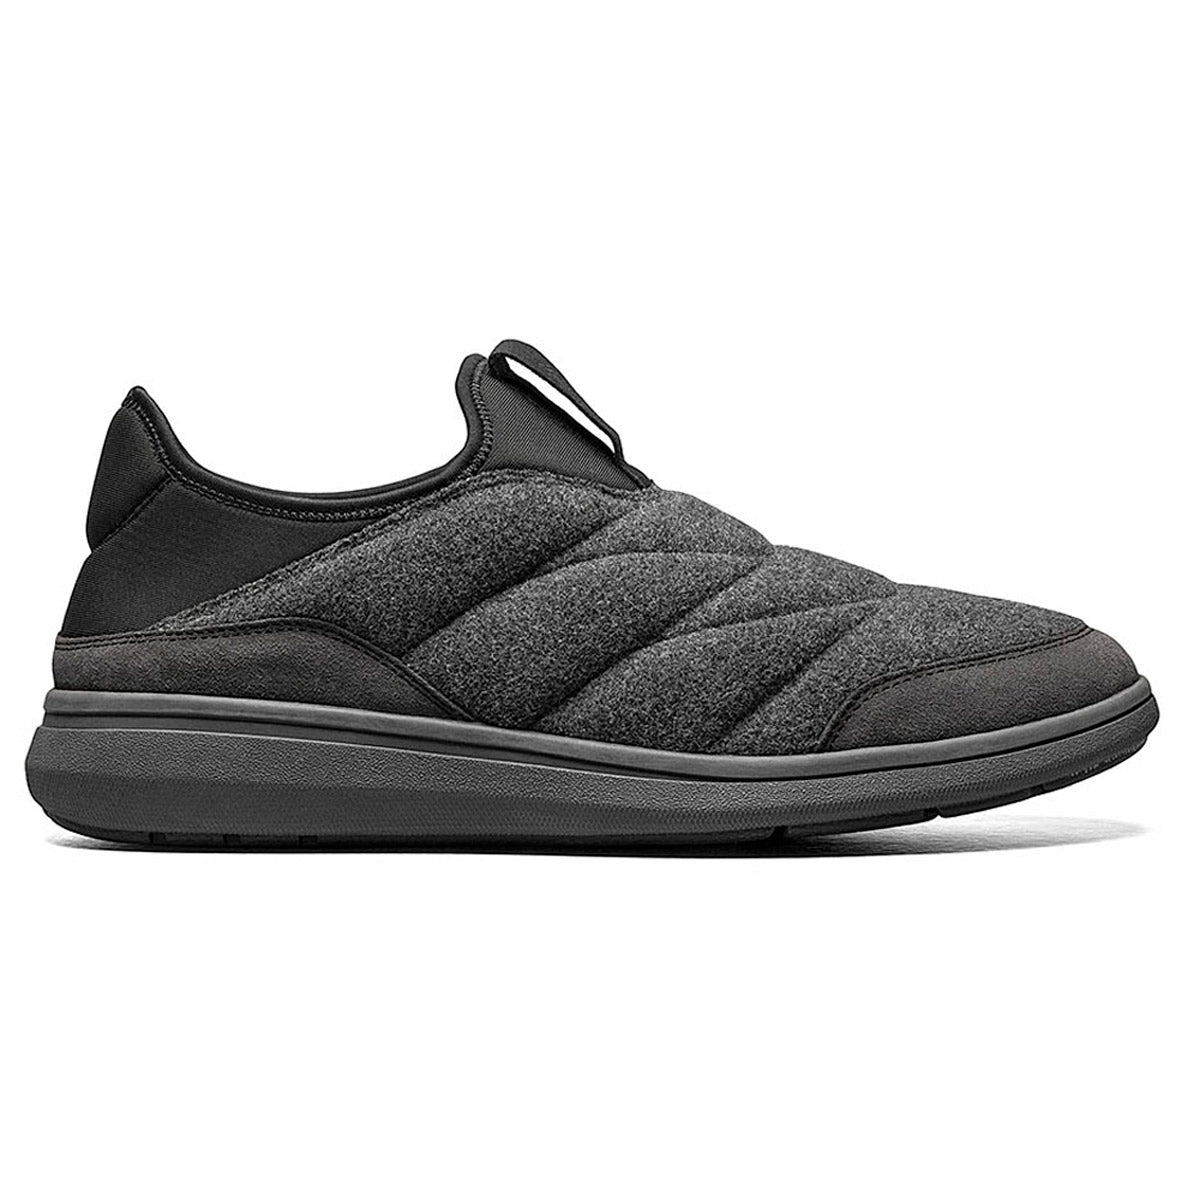 A single black FLORSHEIM JAVA MOC WOOL CHARCOAL - MENS slip-on sneaker with a water-resisting quilted wool upper design and a pull tab on the heel.